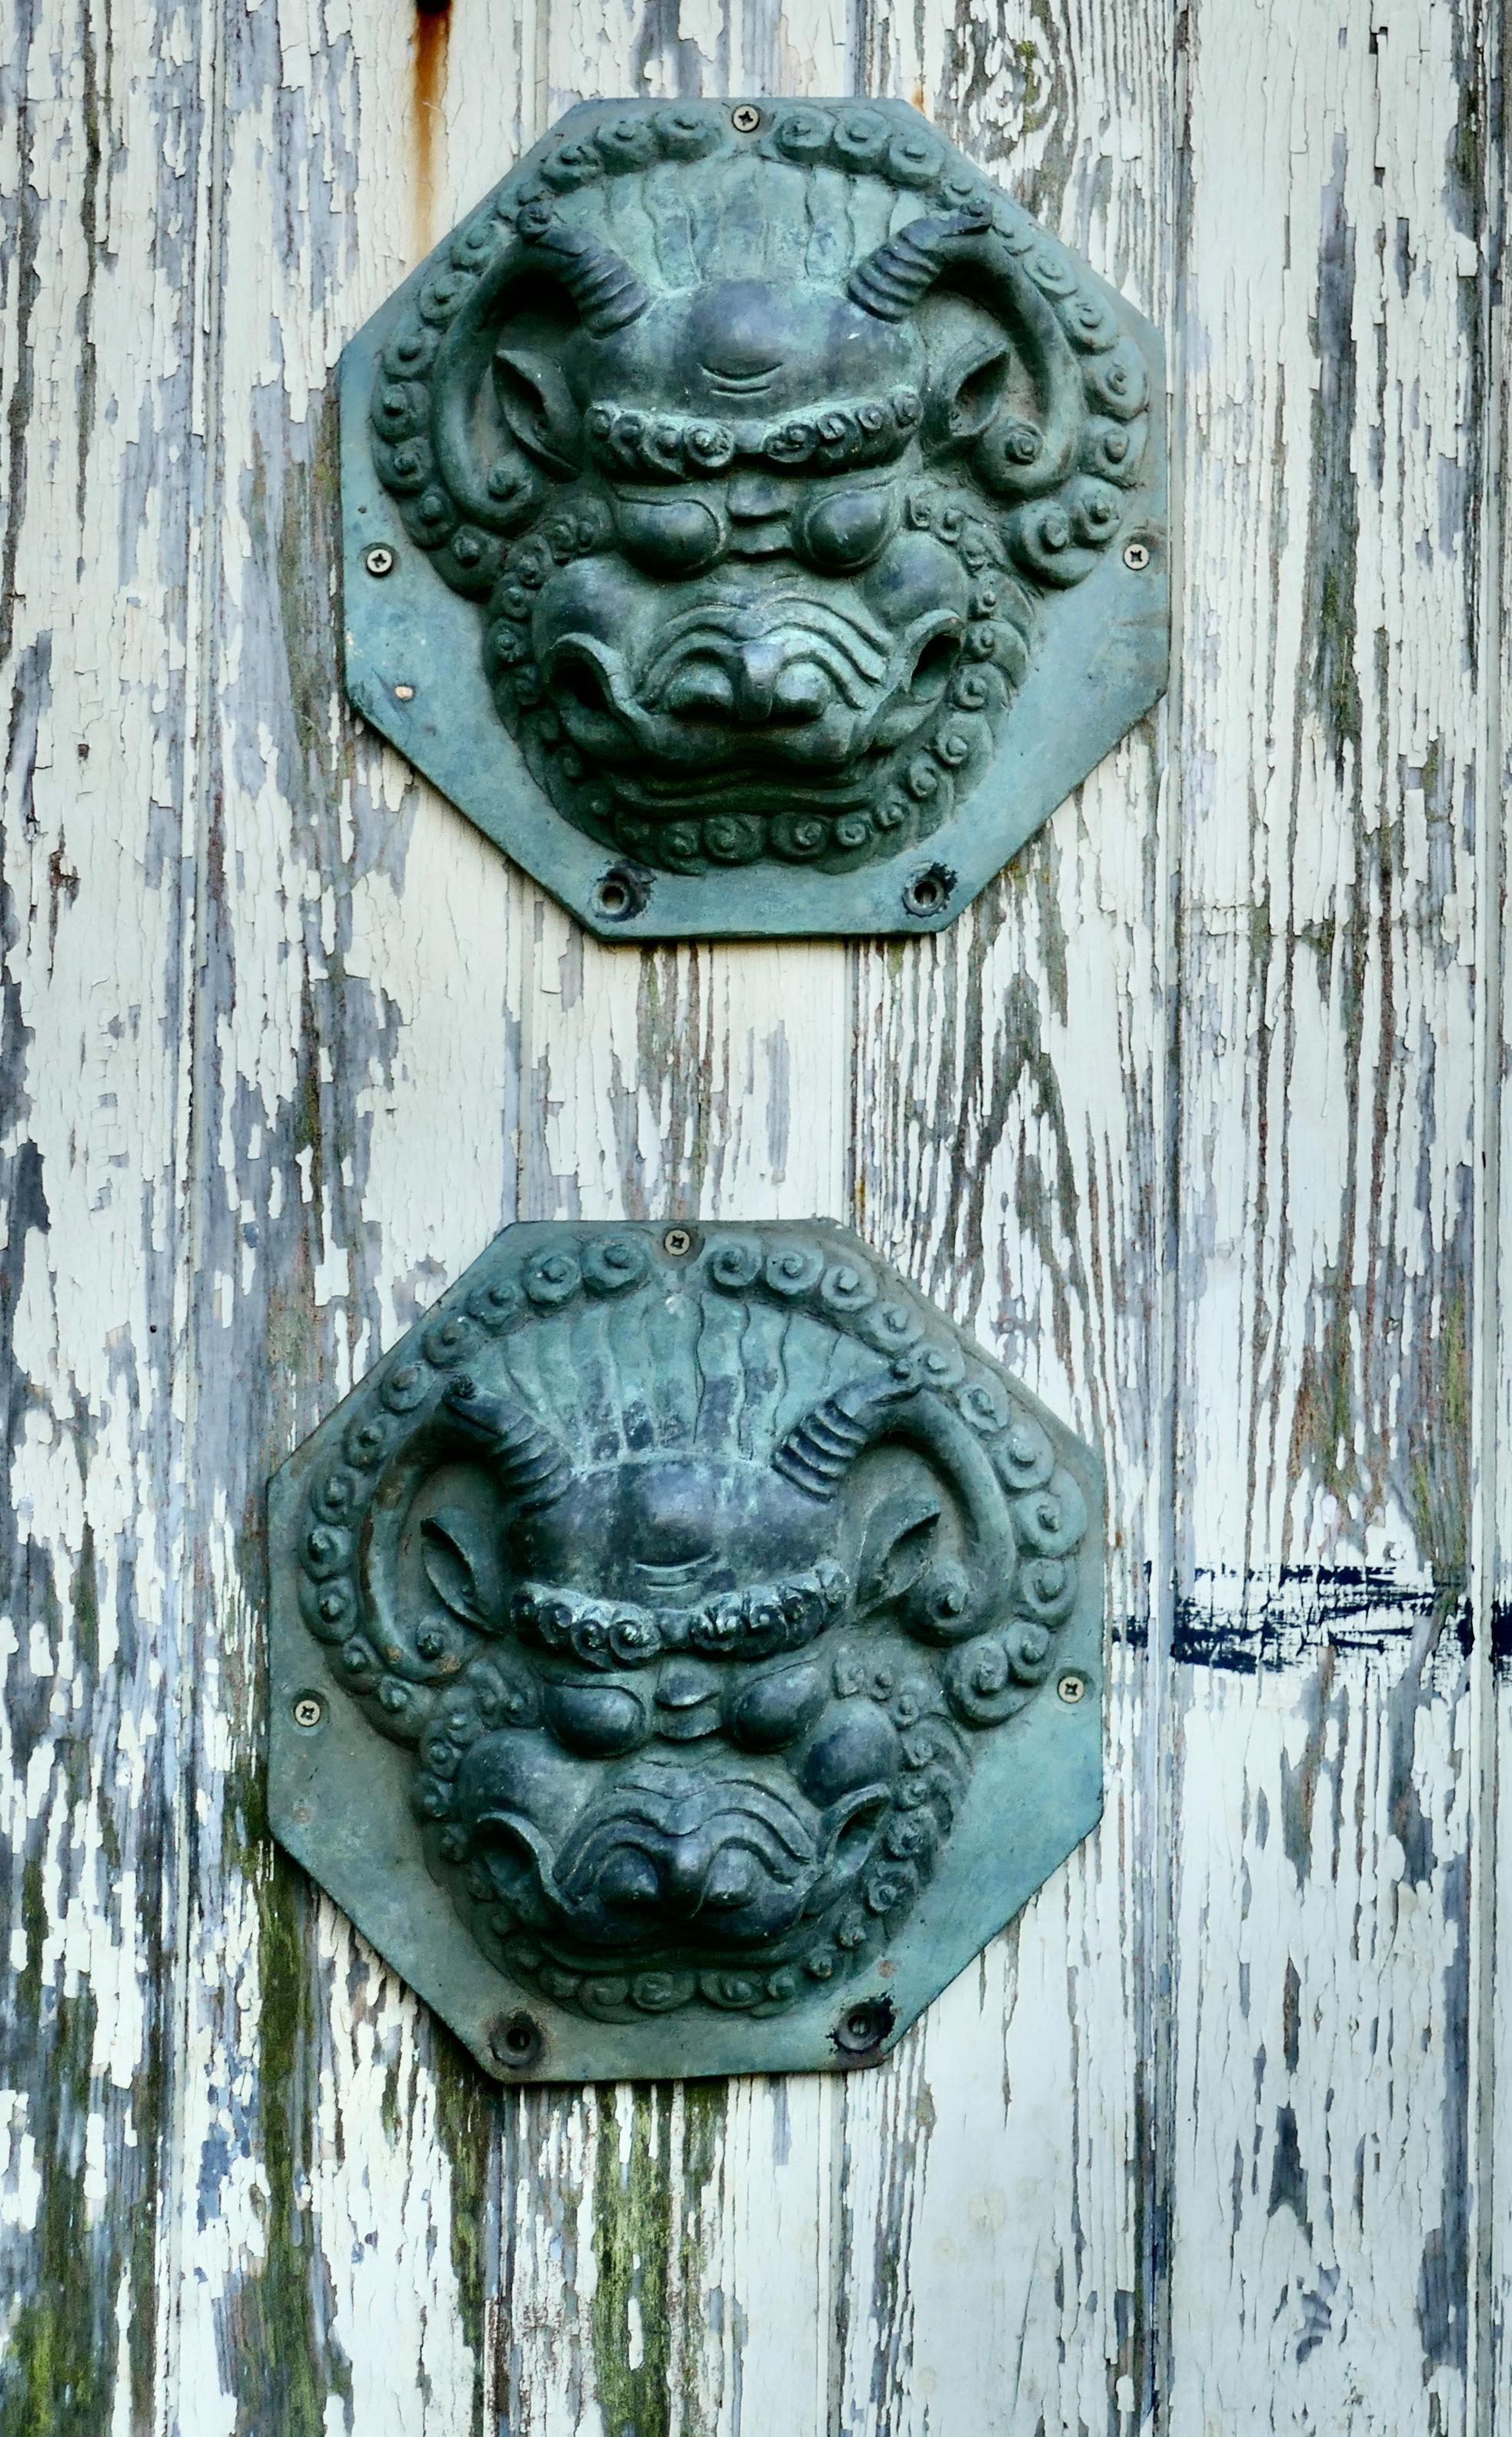 Large antique Chinese bronze foo dog foo lion door plates

A stunning pair of door plates, they are made in bronze and are very heavy, these may originally have had handles through the holes near the mouth

Aged with no faults the plates are